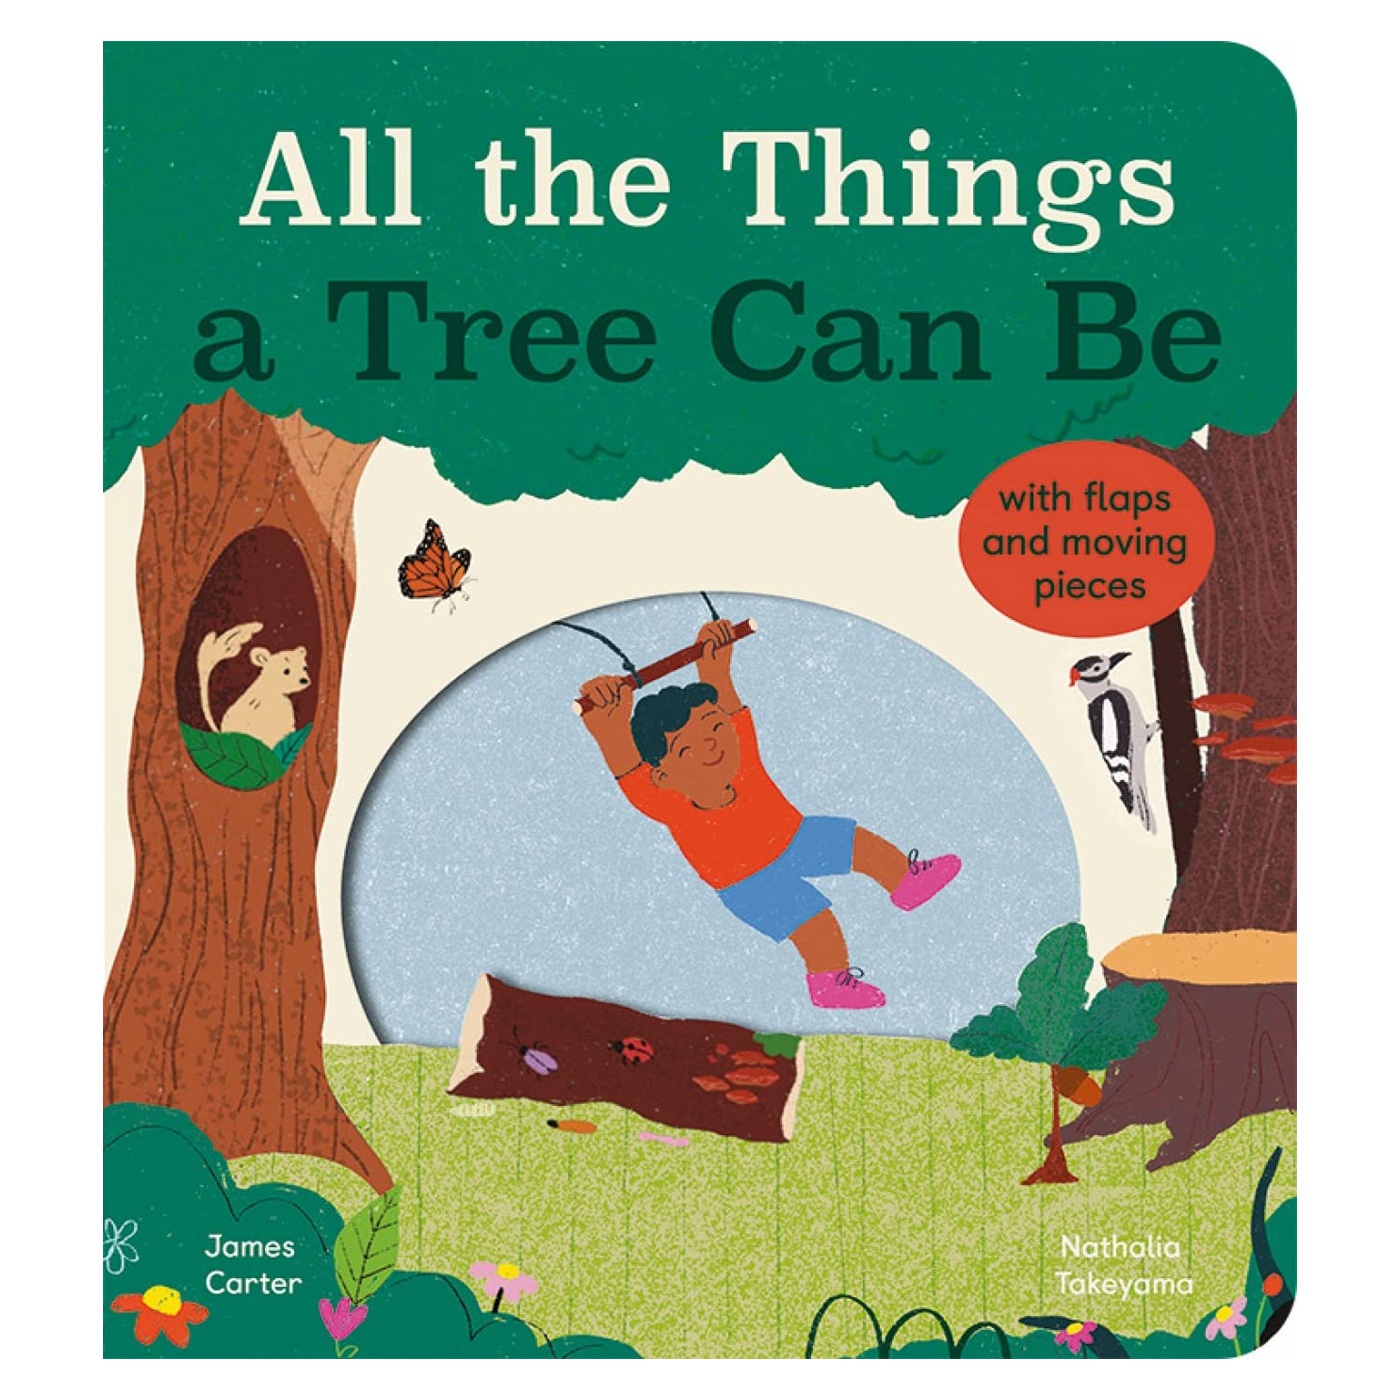  All the Things a Tree Can Be